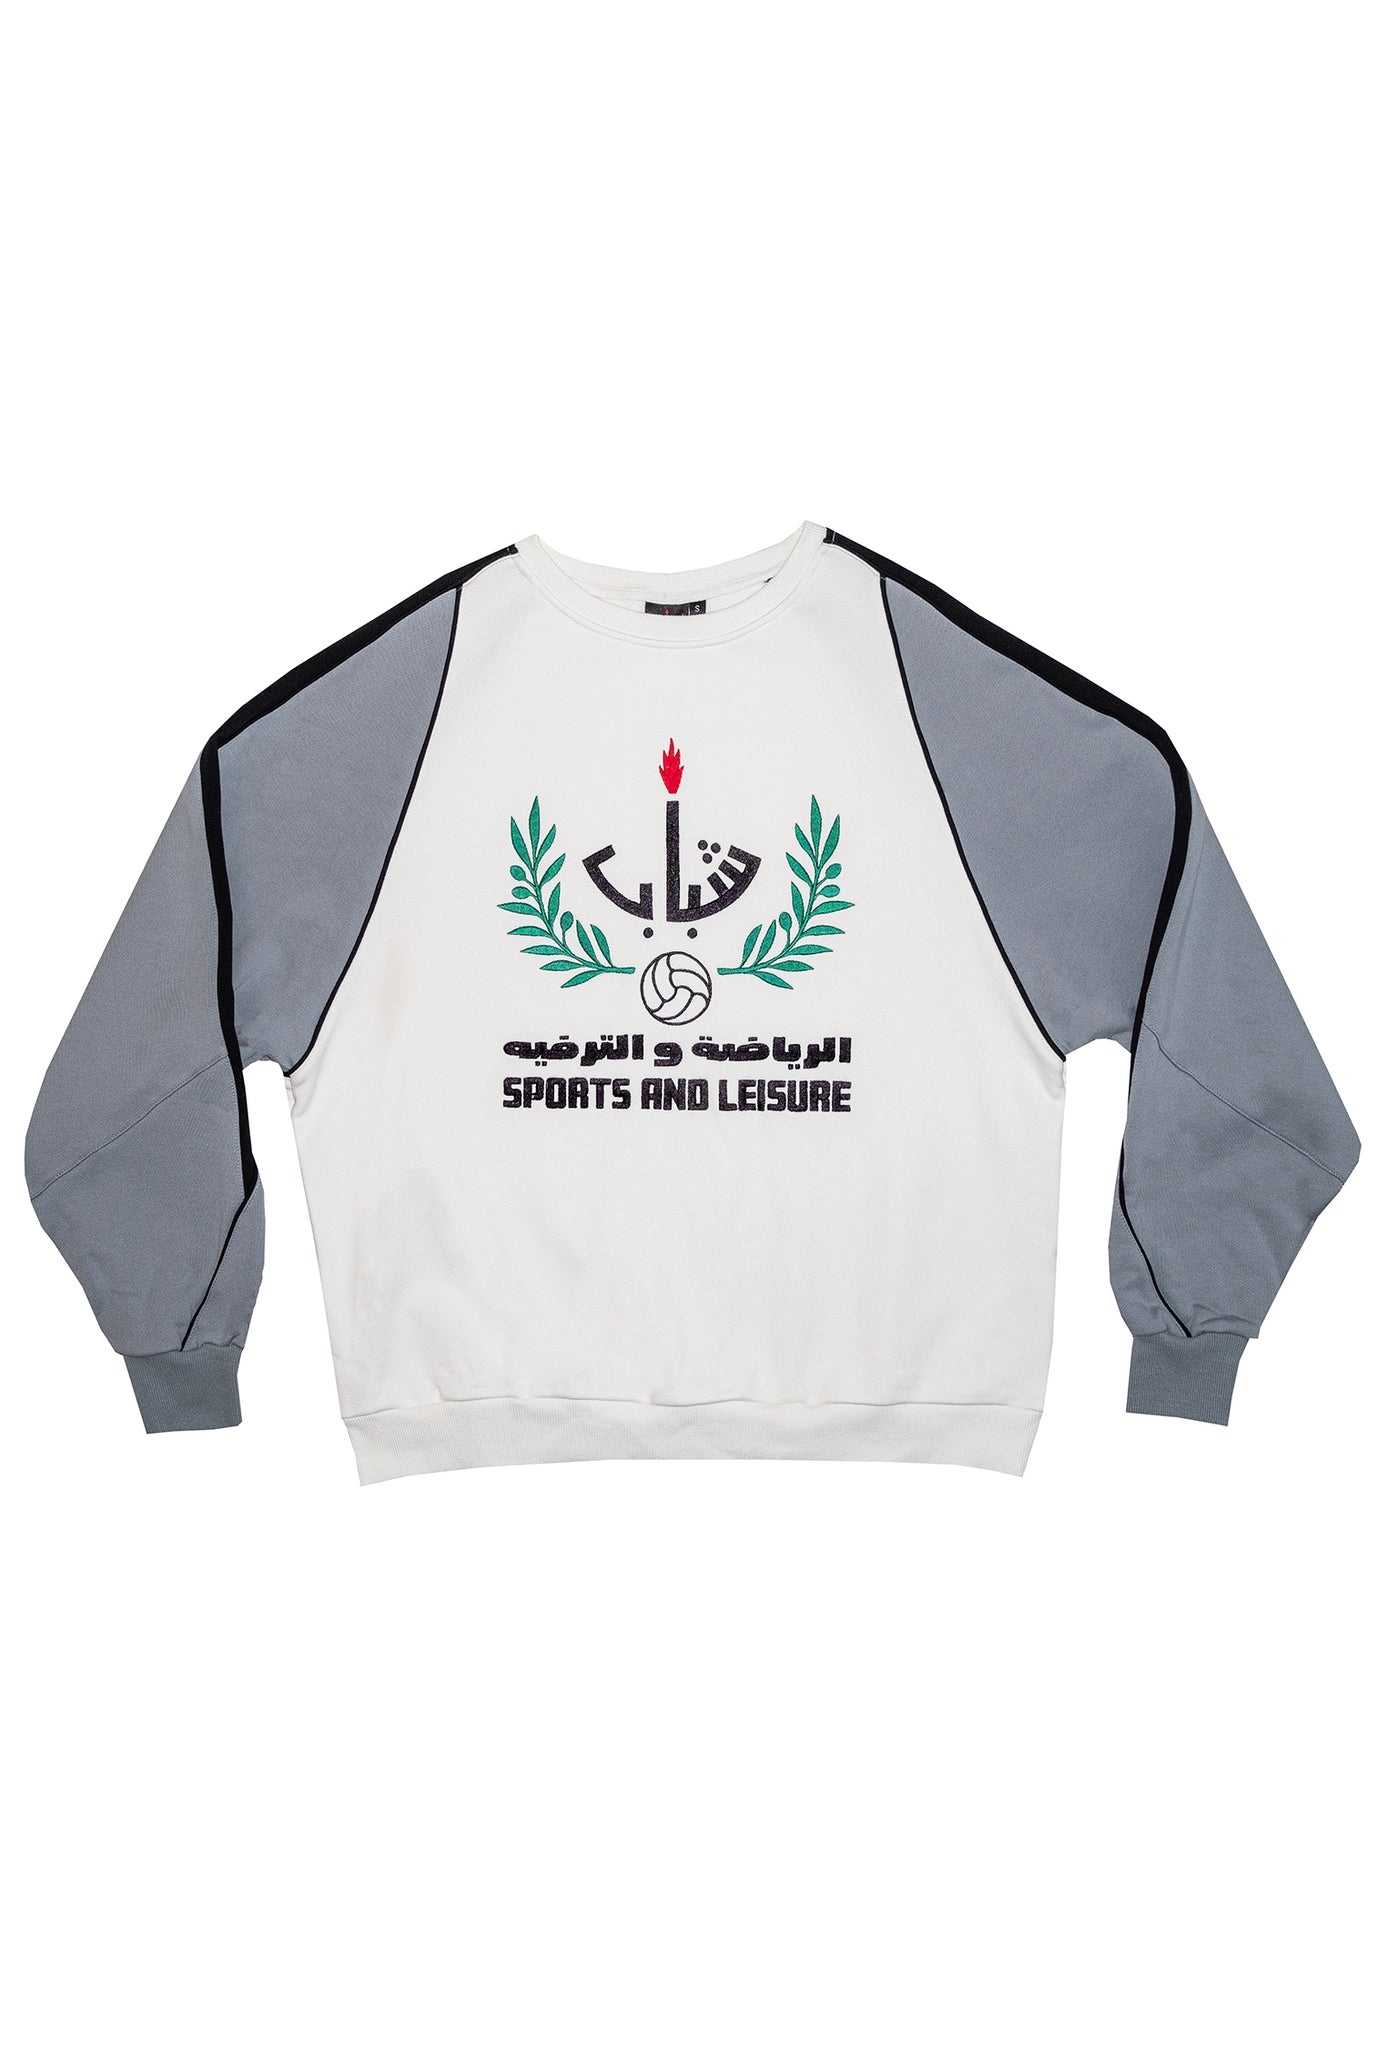 Sports and Leisure Crewneck